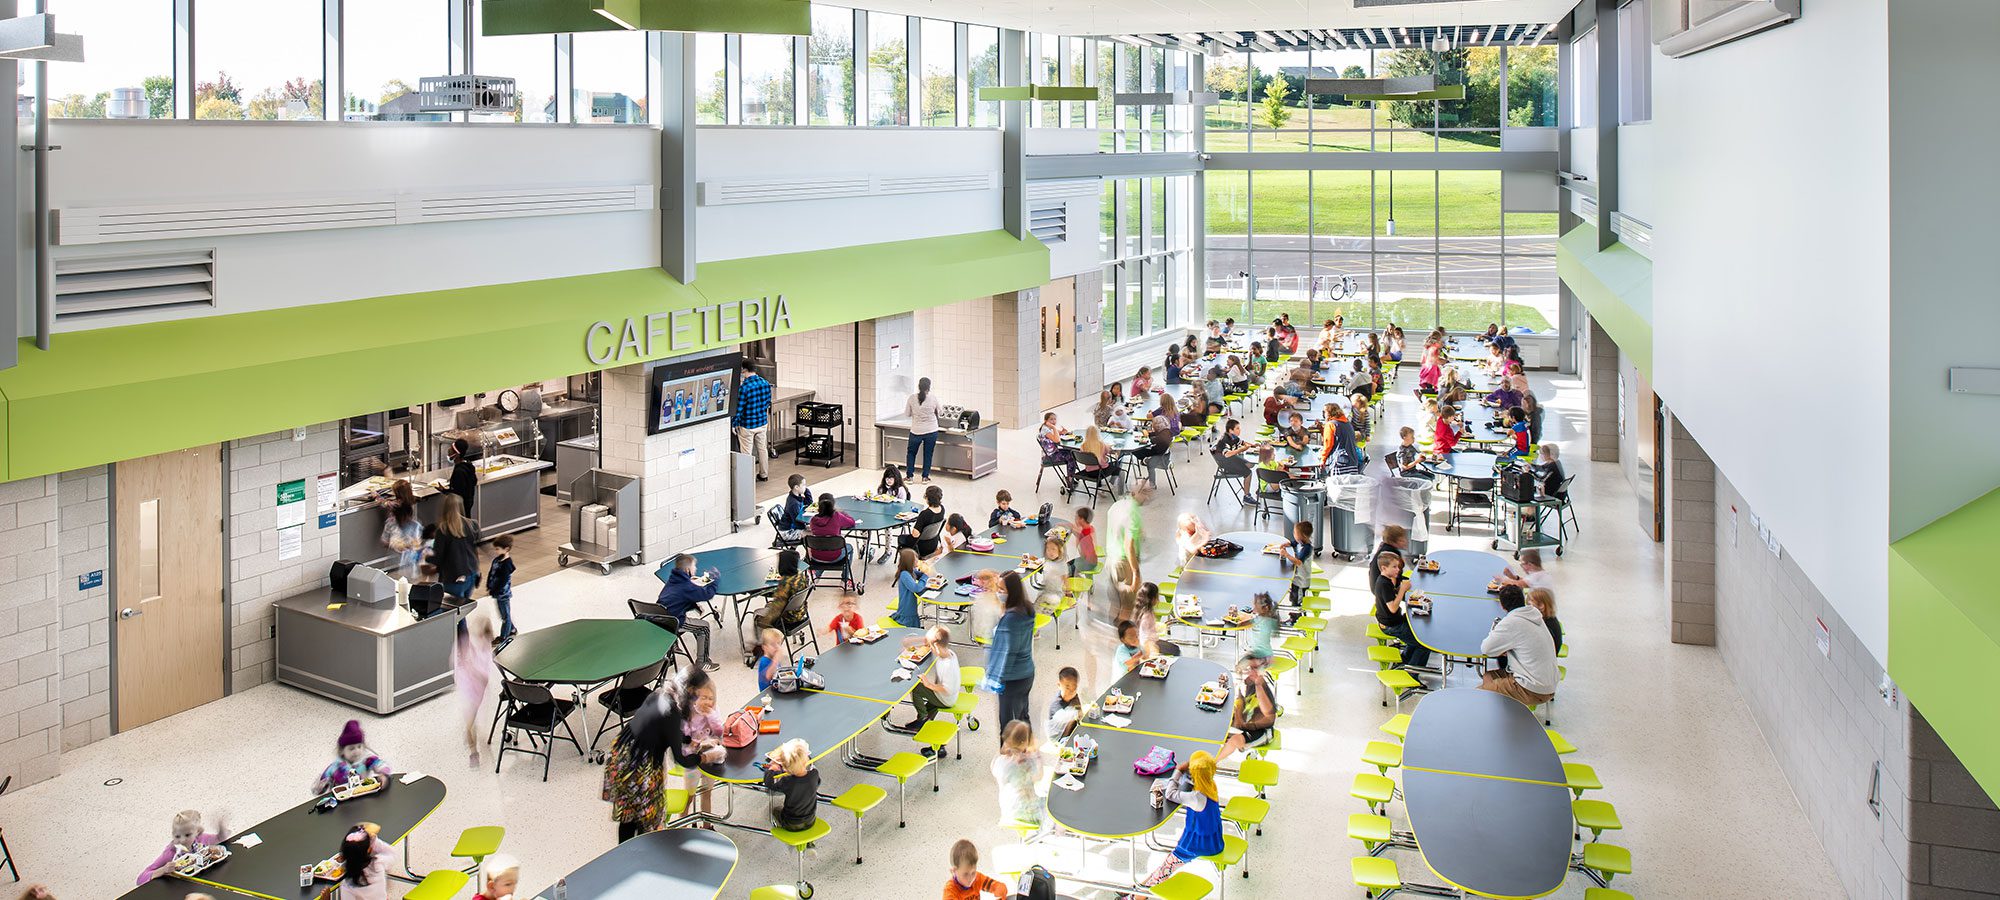 overhead view of cafeteria with students and staff eating